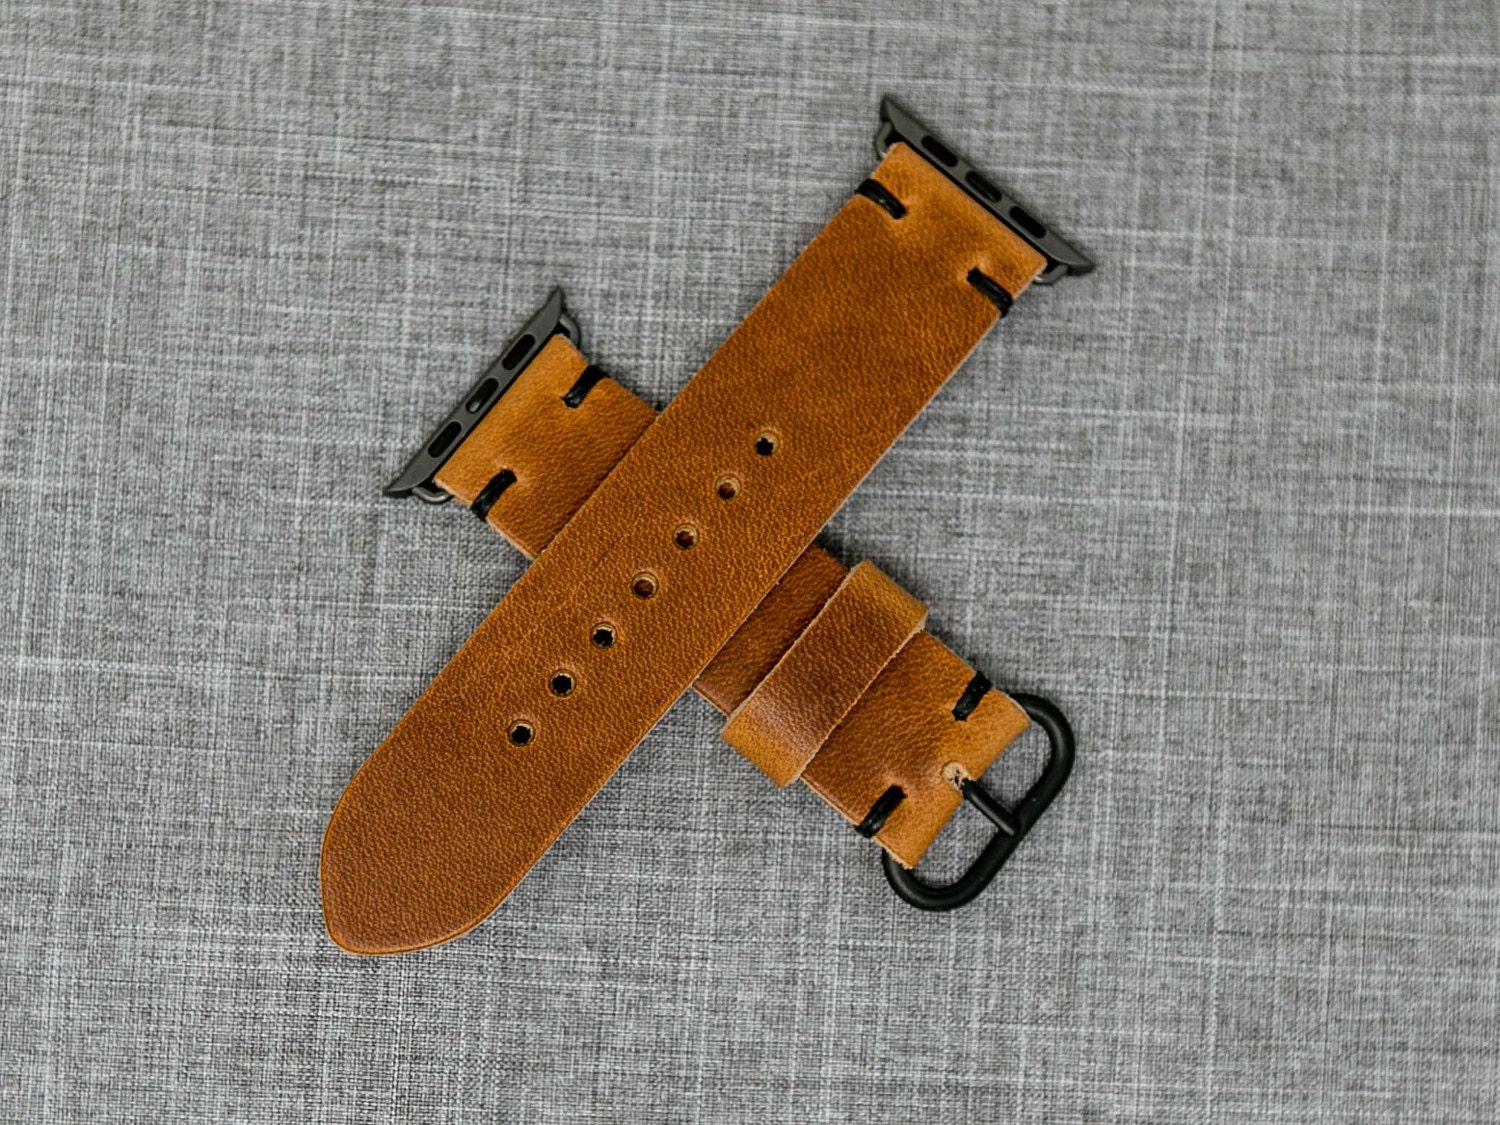 Apple Watch Band The Hudson Strap for Apple Watch Horween | Etsy